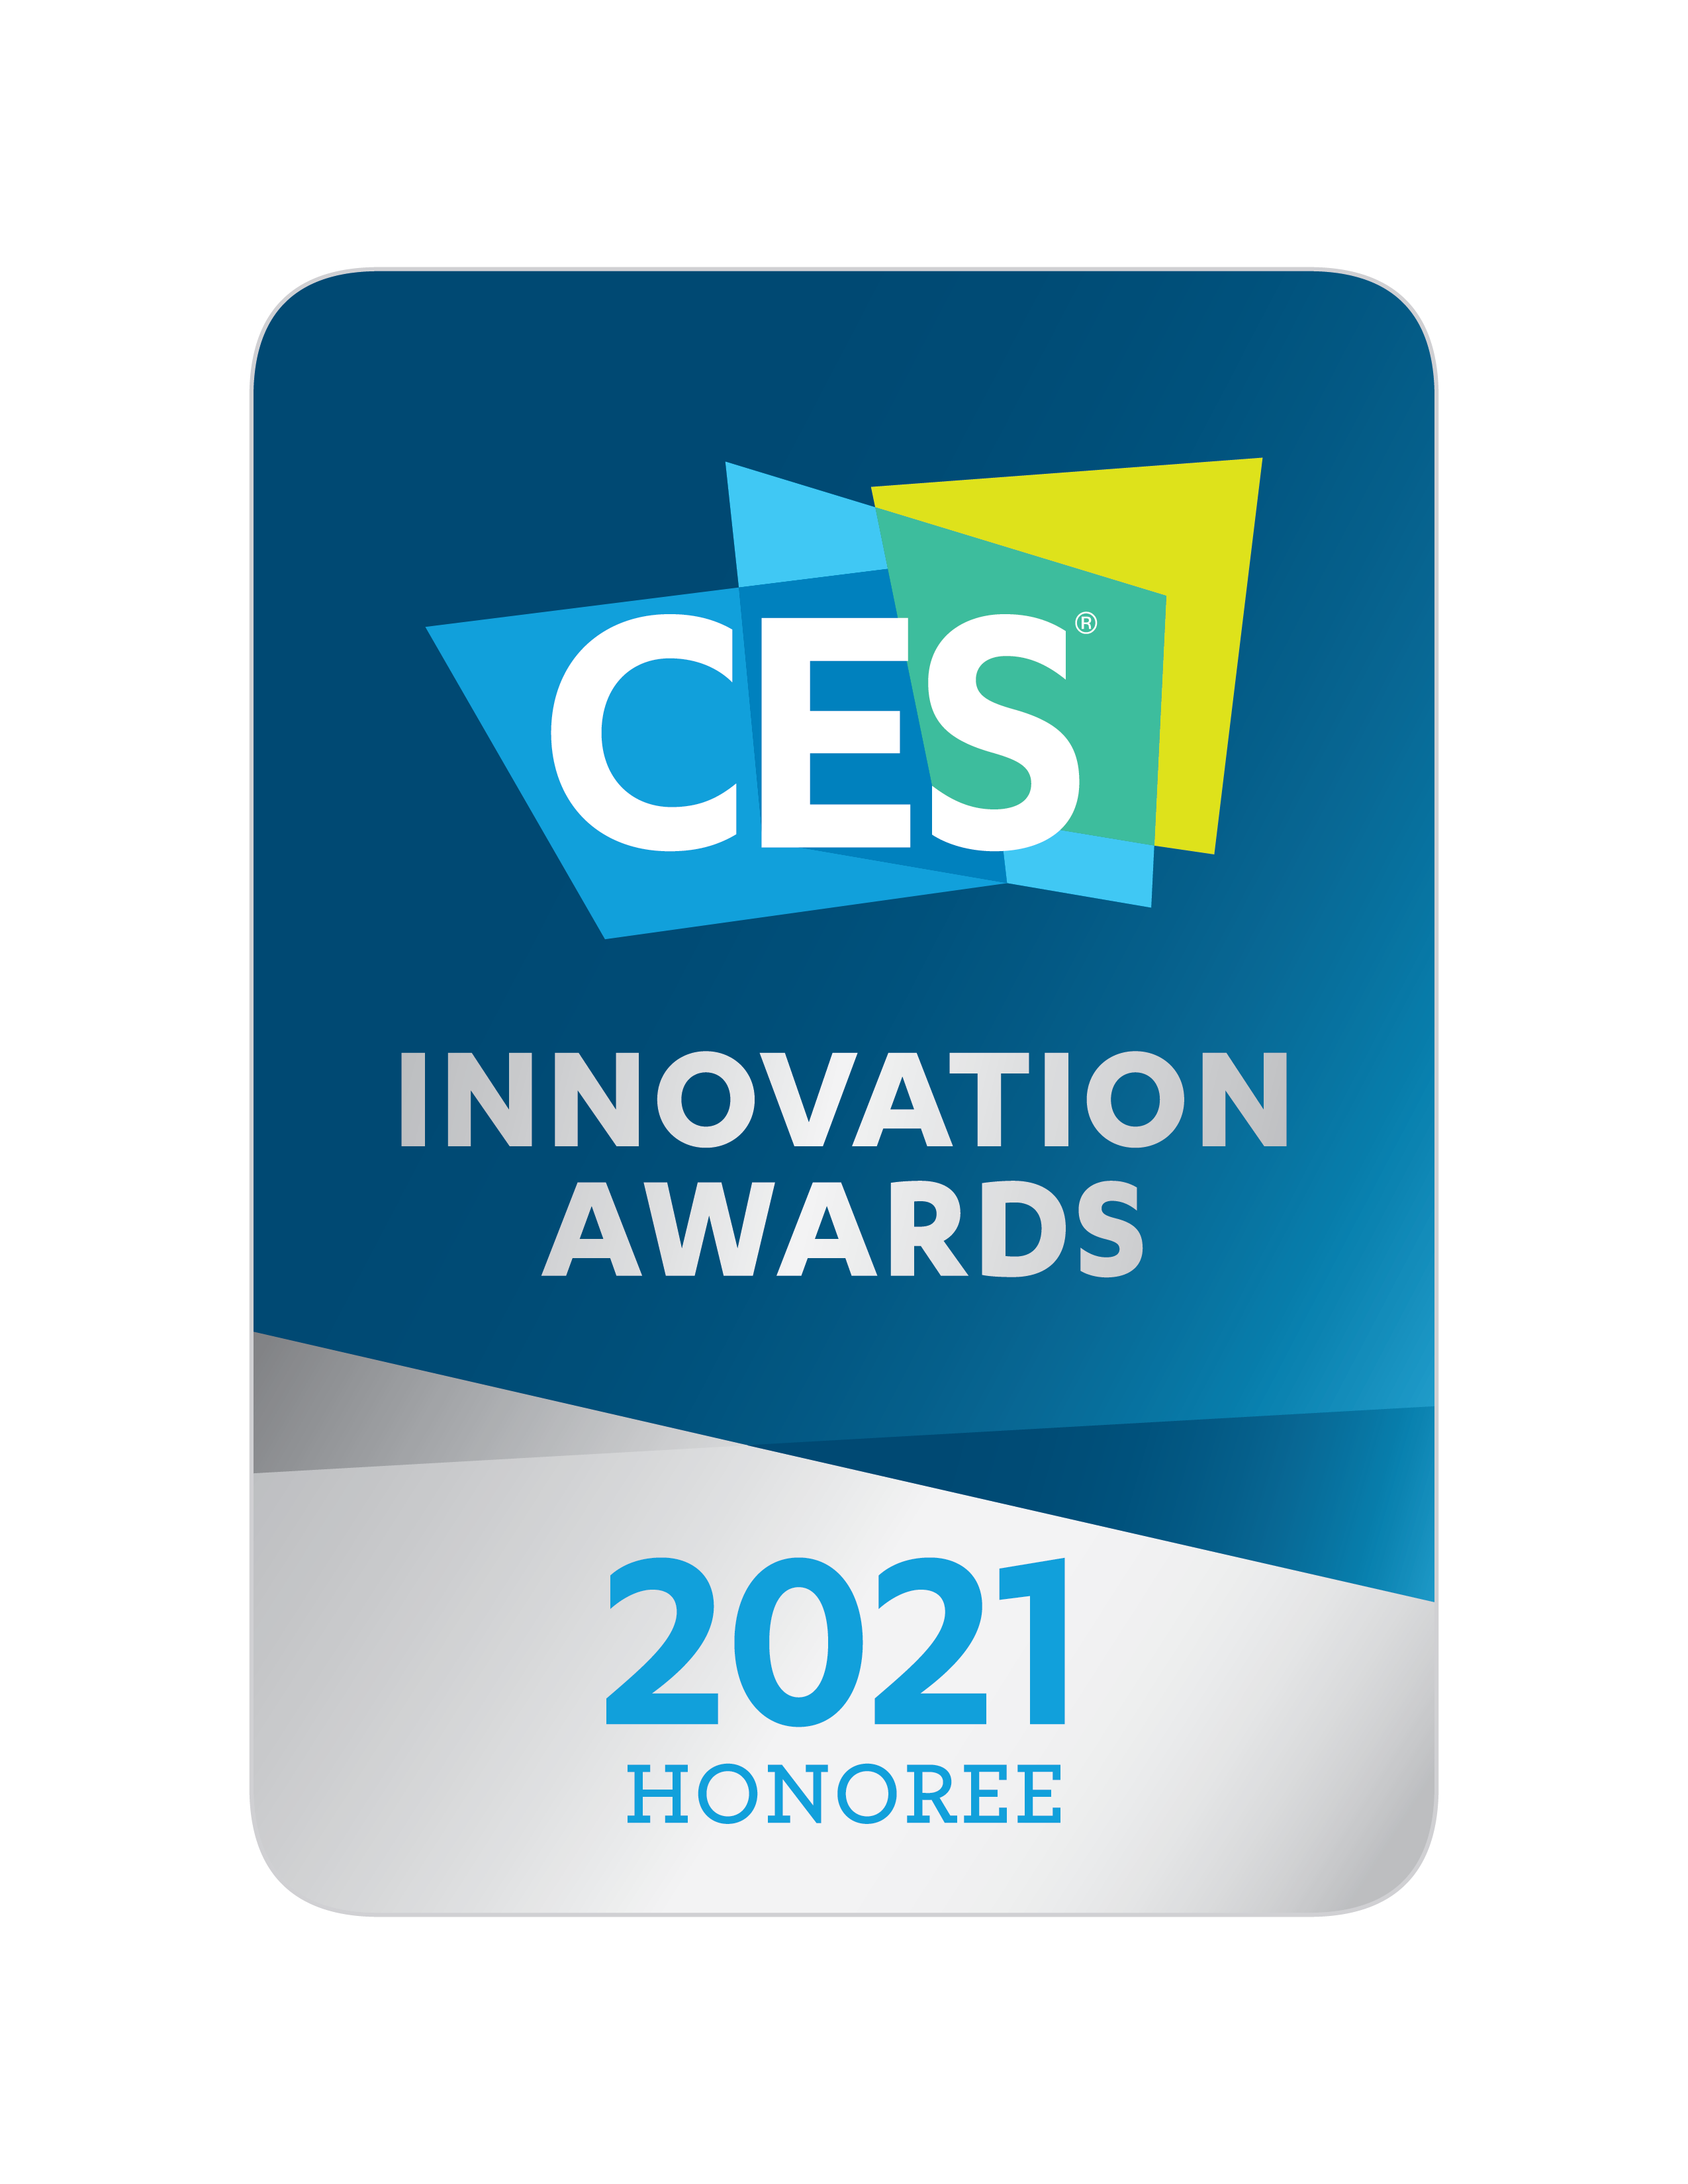 The CES Innovation Awards program, owned and produced by the Consumer Technology Association (CTA)®, is an annual competition honoring outstanding design and engineering in consumer technology products across 28 product categories. An elite panel of industry expert judges, including members of the media, designers, engineers and more, reviewed submissions based on innovation, engineering and functionality, aesthetic and design. 